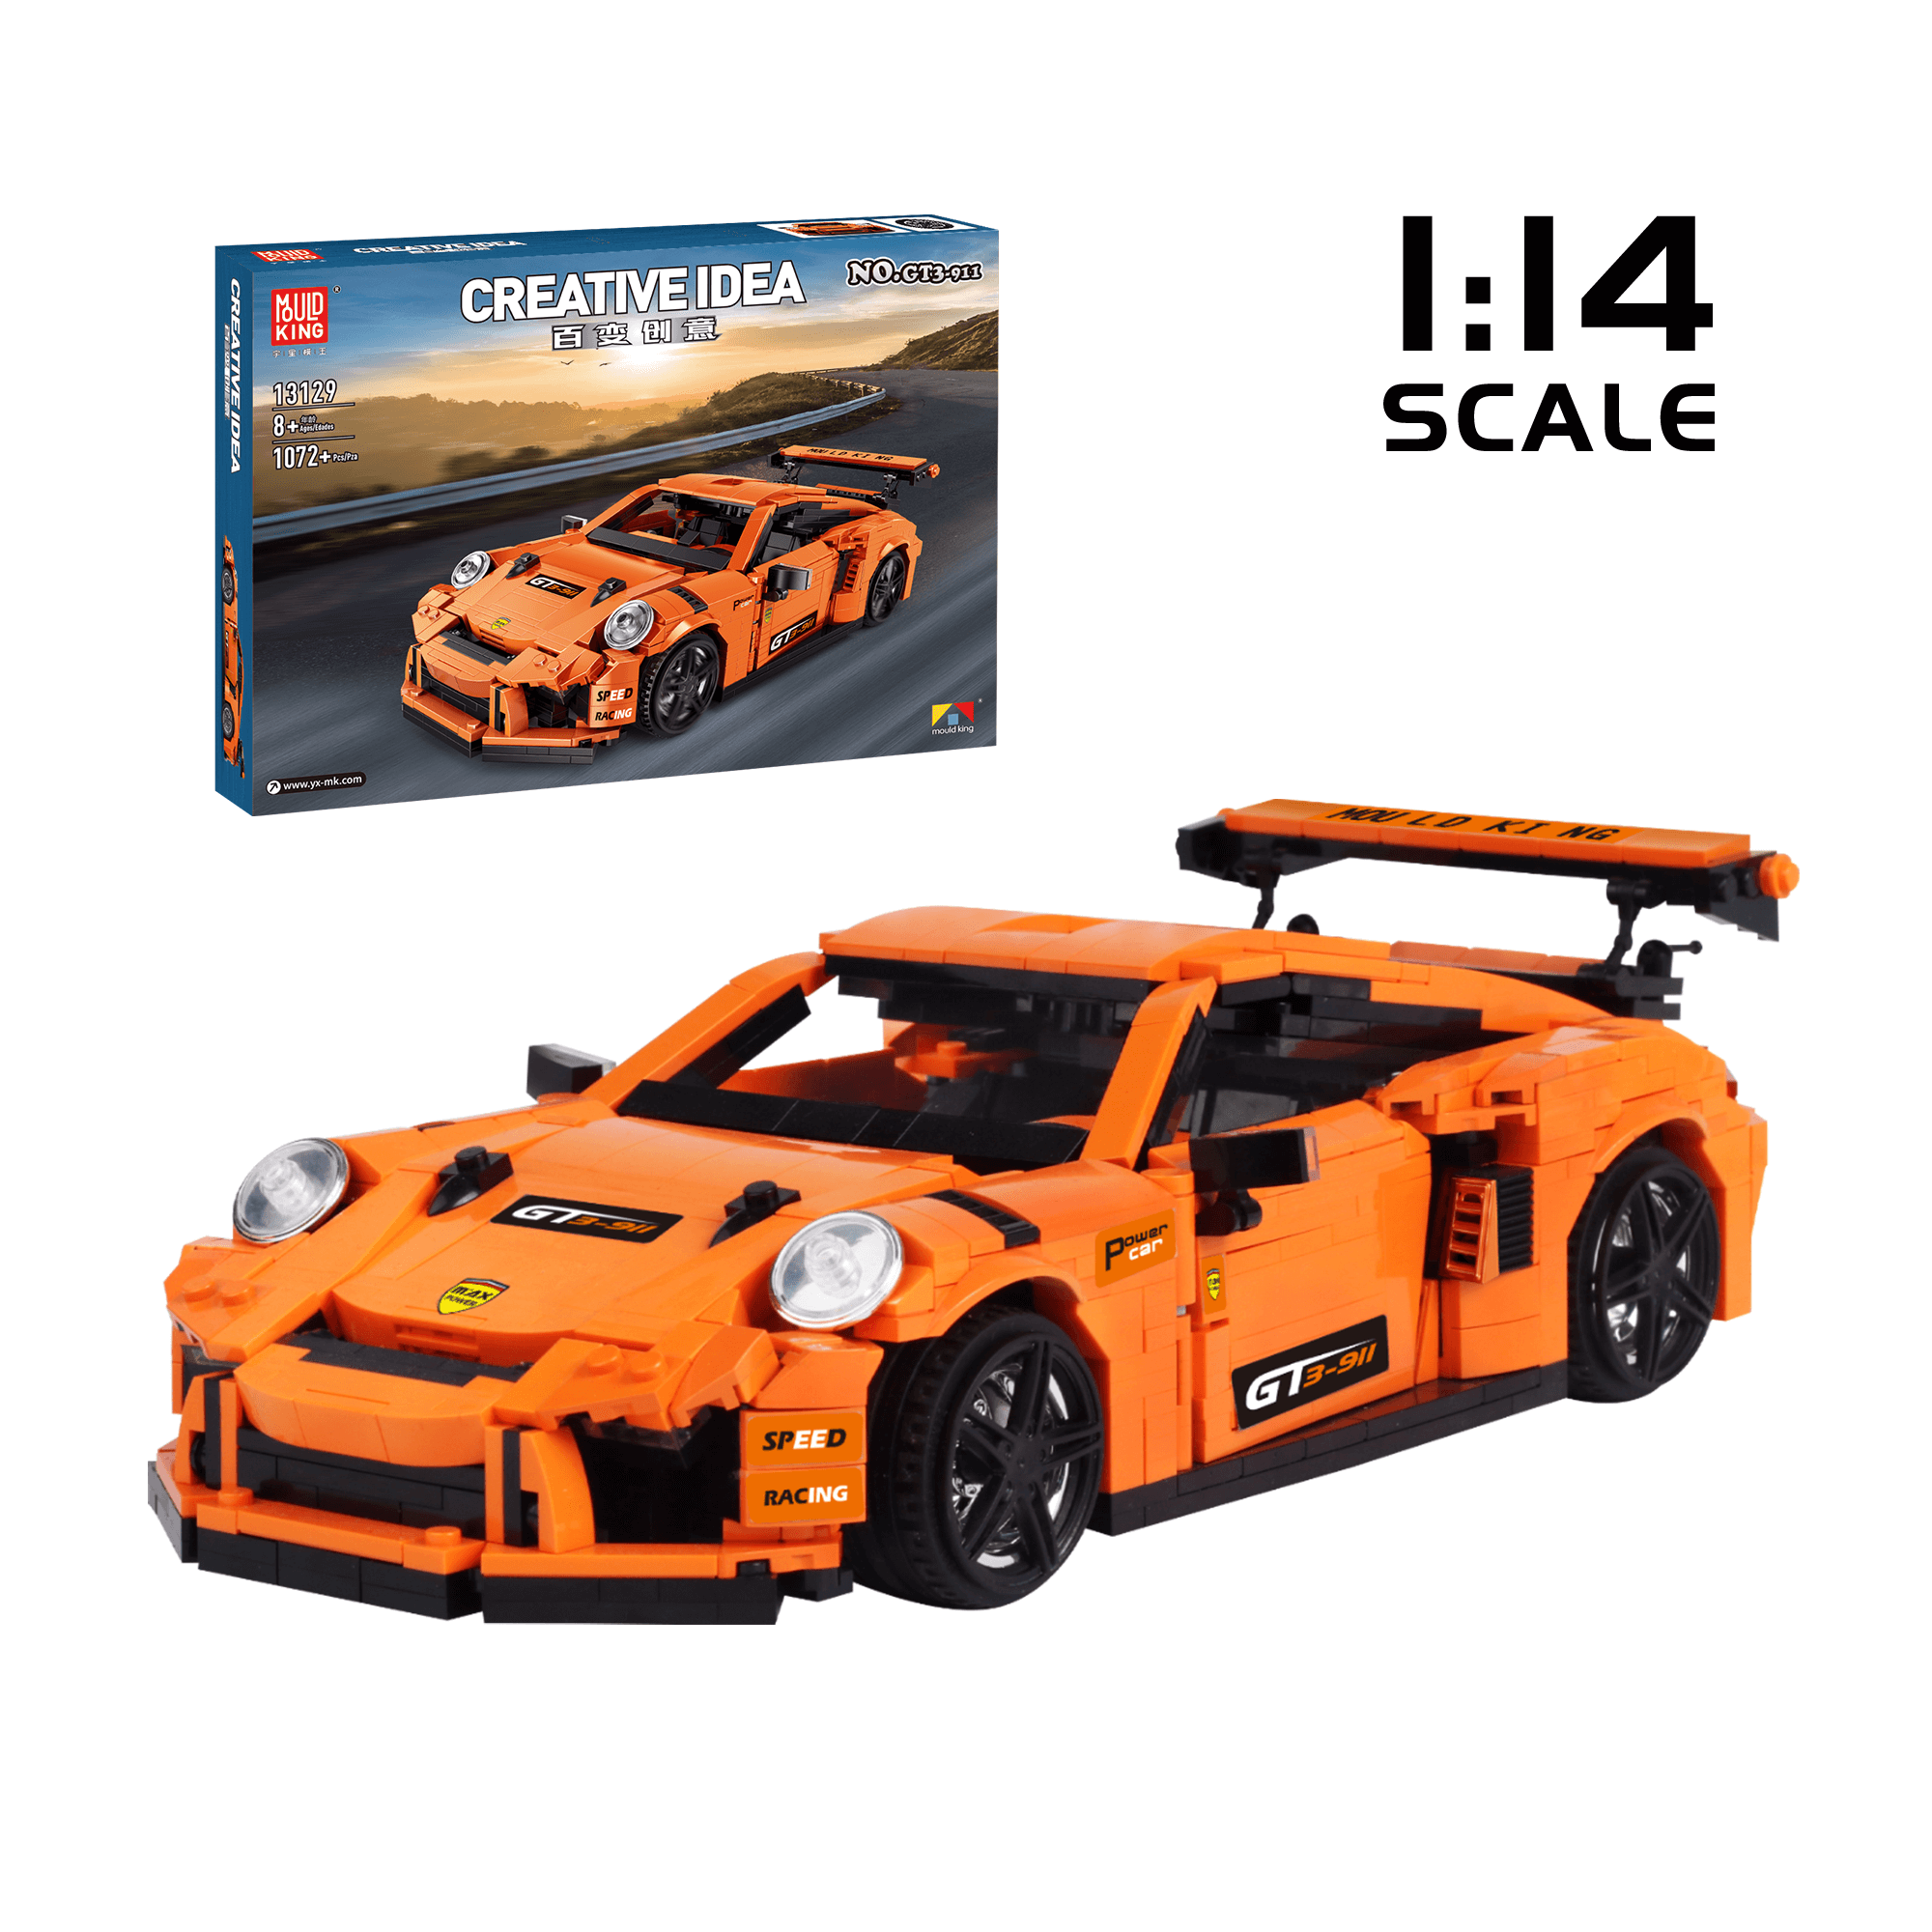 Porsche 911 GT3 RS - why building Lego sets is so much fun! – by Michael  Sliwinski